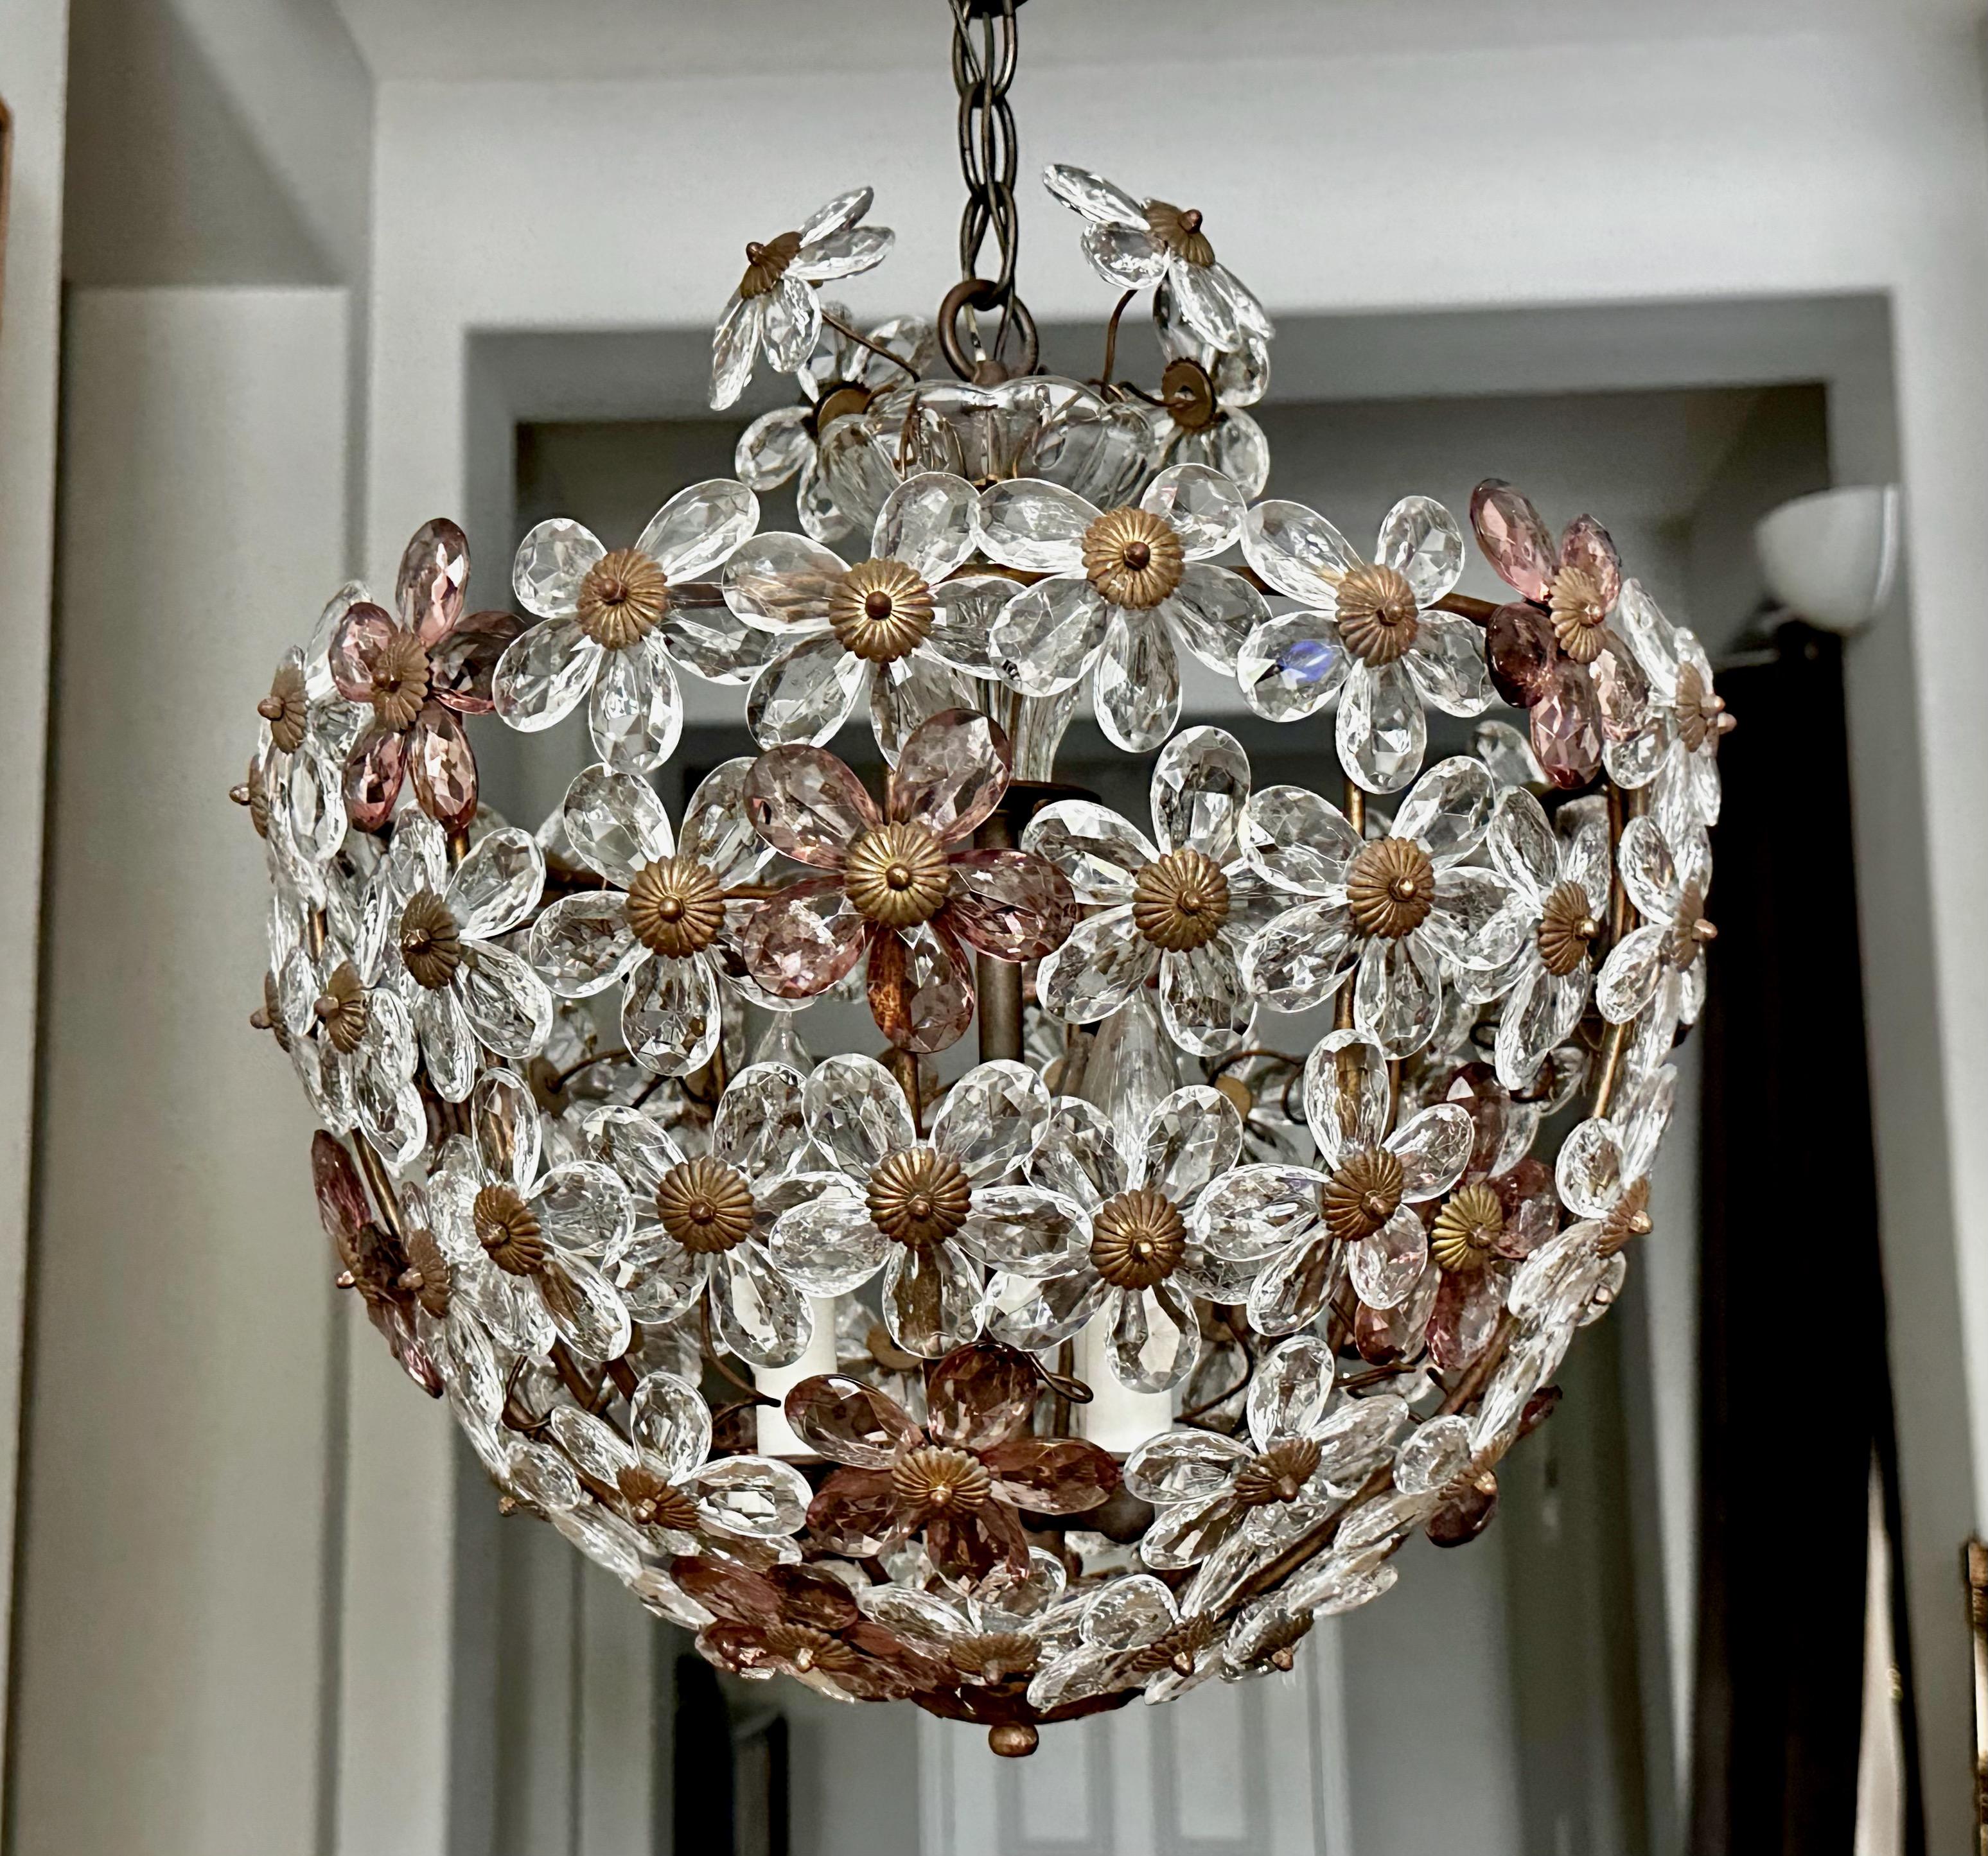 Elegant Bagues style crystal floral or flower pendant or chandelier light with brass bronzed patina frame hardware and ceiling cap.  The 5 petal cut crystal pedal flowers alternate in clear and amethyst purple. Fixture uses 3 candelabra base bulbs